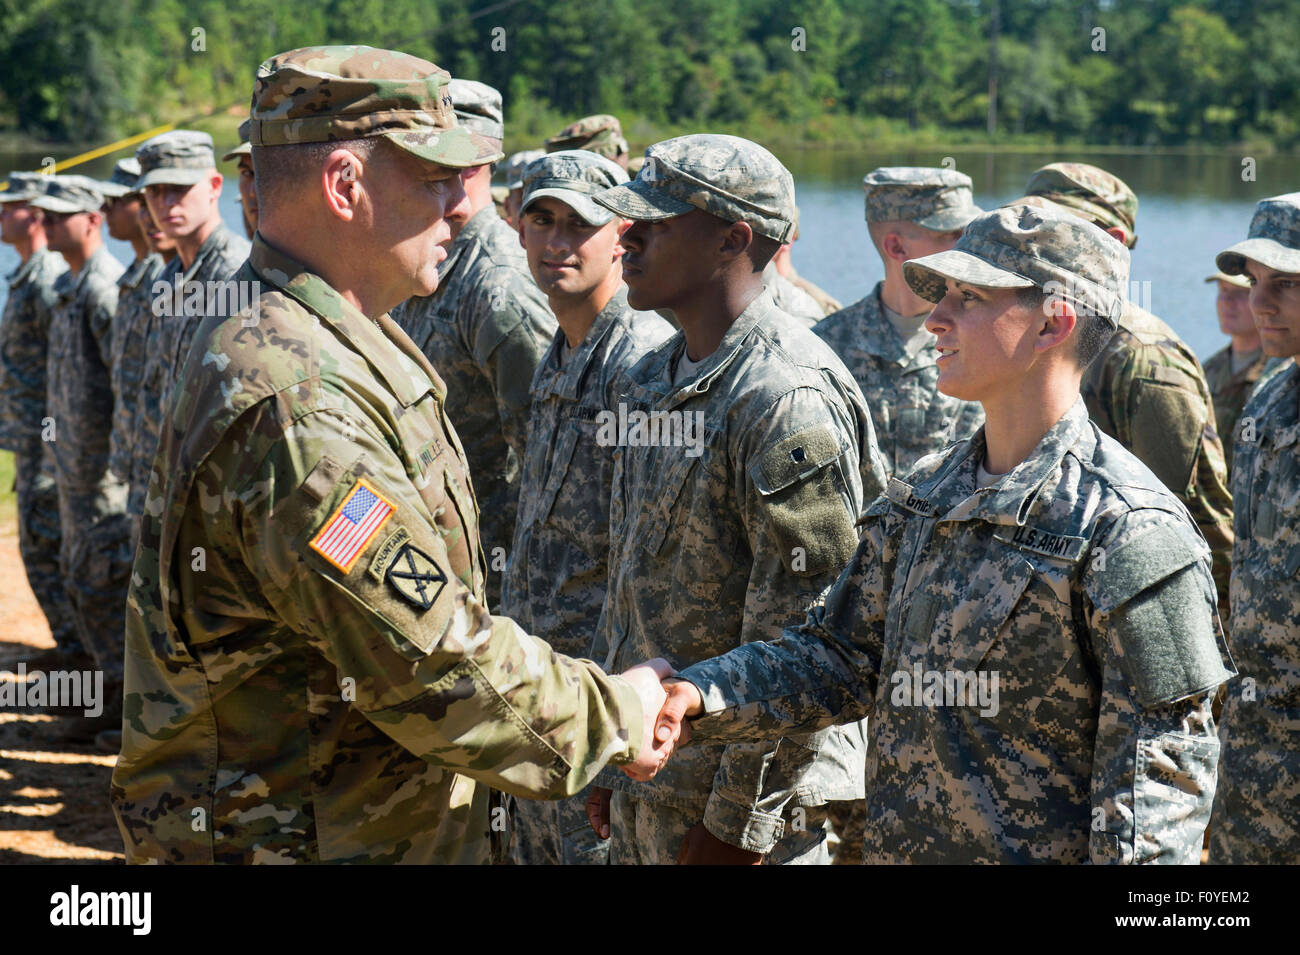 U.S. Army Captain Kristen Griest is congratulated by Army Chief of Staff Gen. Mark A. Milley after becoming the first woman to graduate from Army Ranger school August 21, 2015 at Fort Benning, Georgia. Griest and fellow soldier 1st Lt. Shaye Haver became the first women to graduate from the 61-day-long Ranger course considered one of the most intense and demanding in the military. Stock Photo